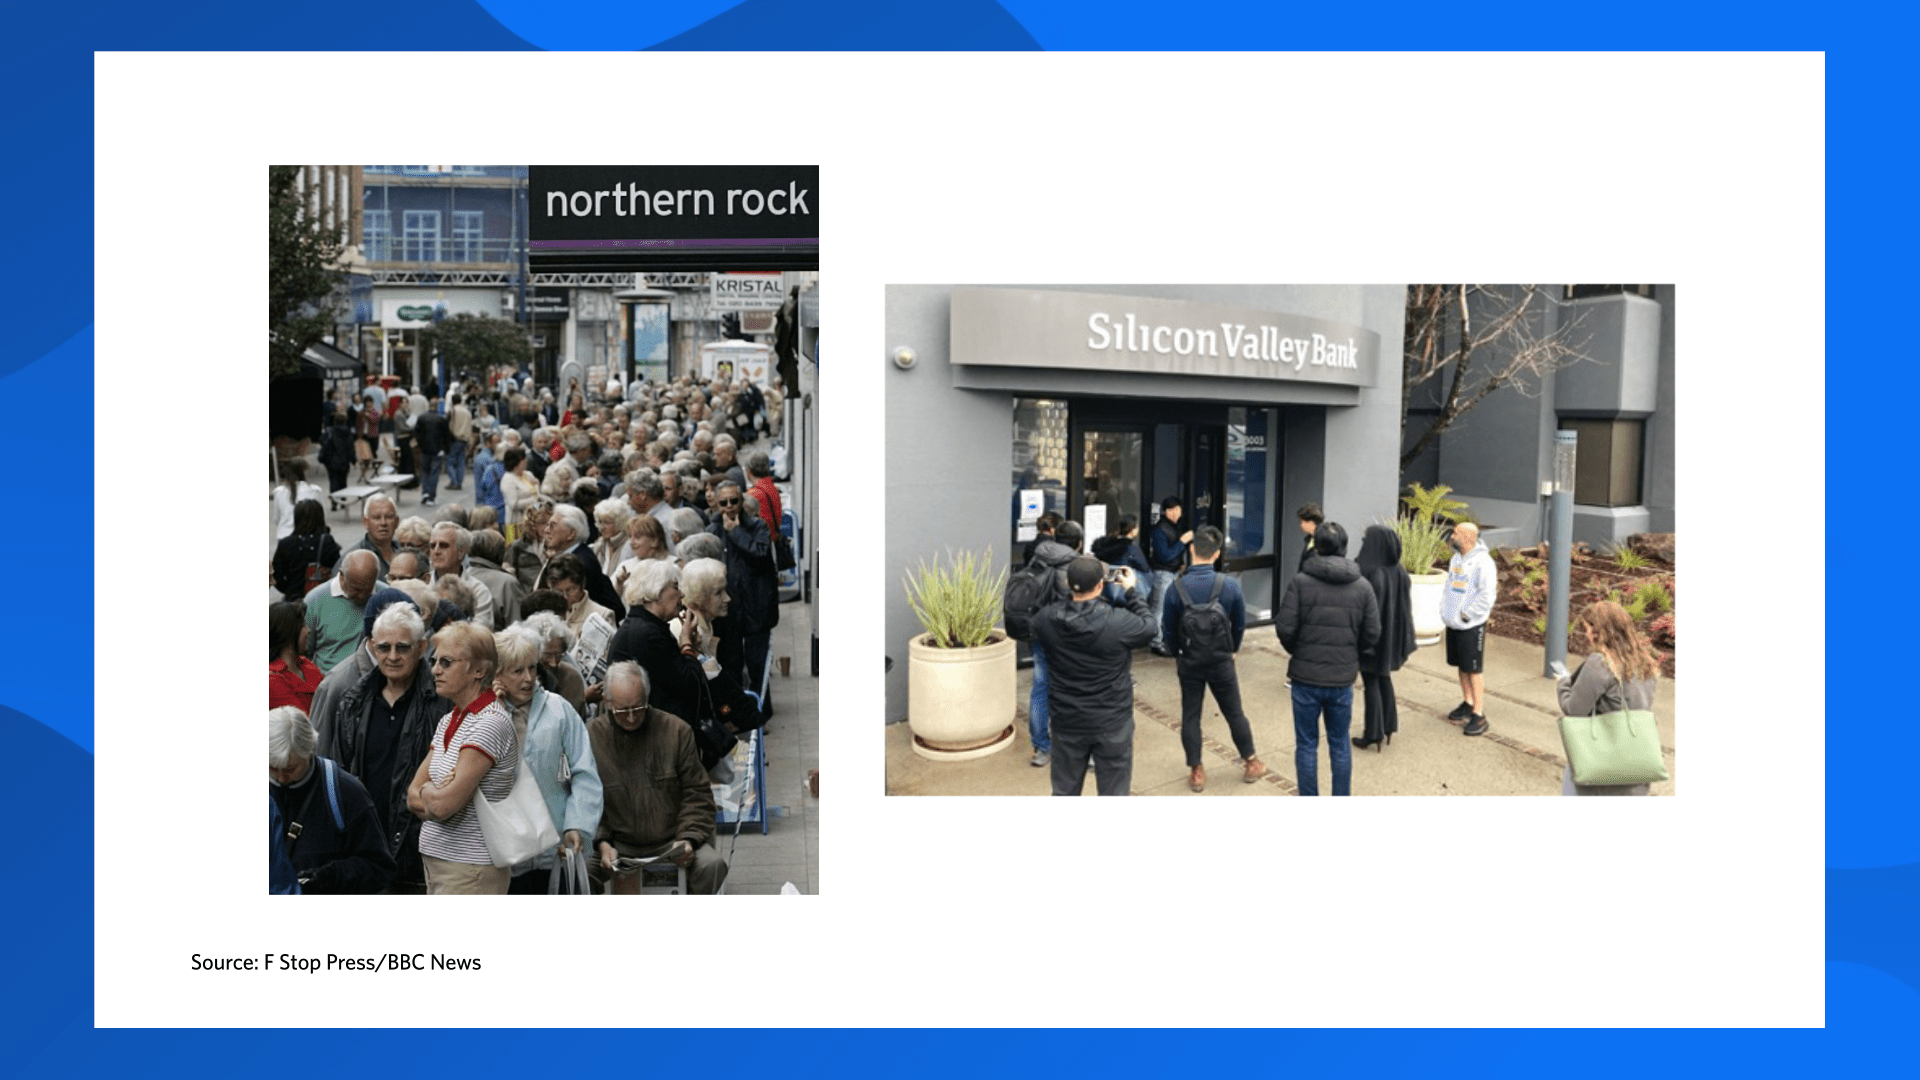 Image 2: On the left, a picture shows a large gathering of people outside Northern Rock during a bank run around the time of the Global Financial Crisis (GFC). On the right, a picture shows a small group of people gathered outside Silicon Valley bank in March 2023.